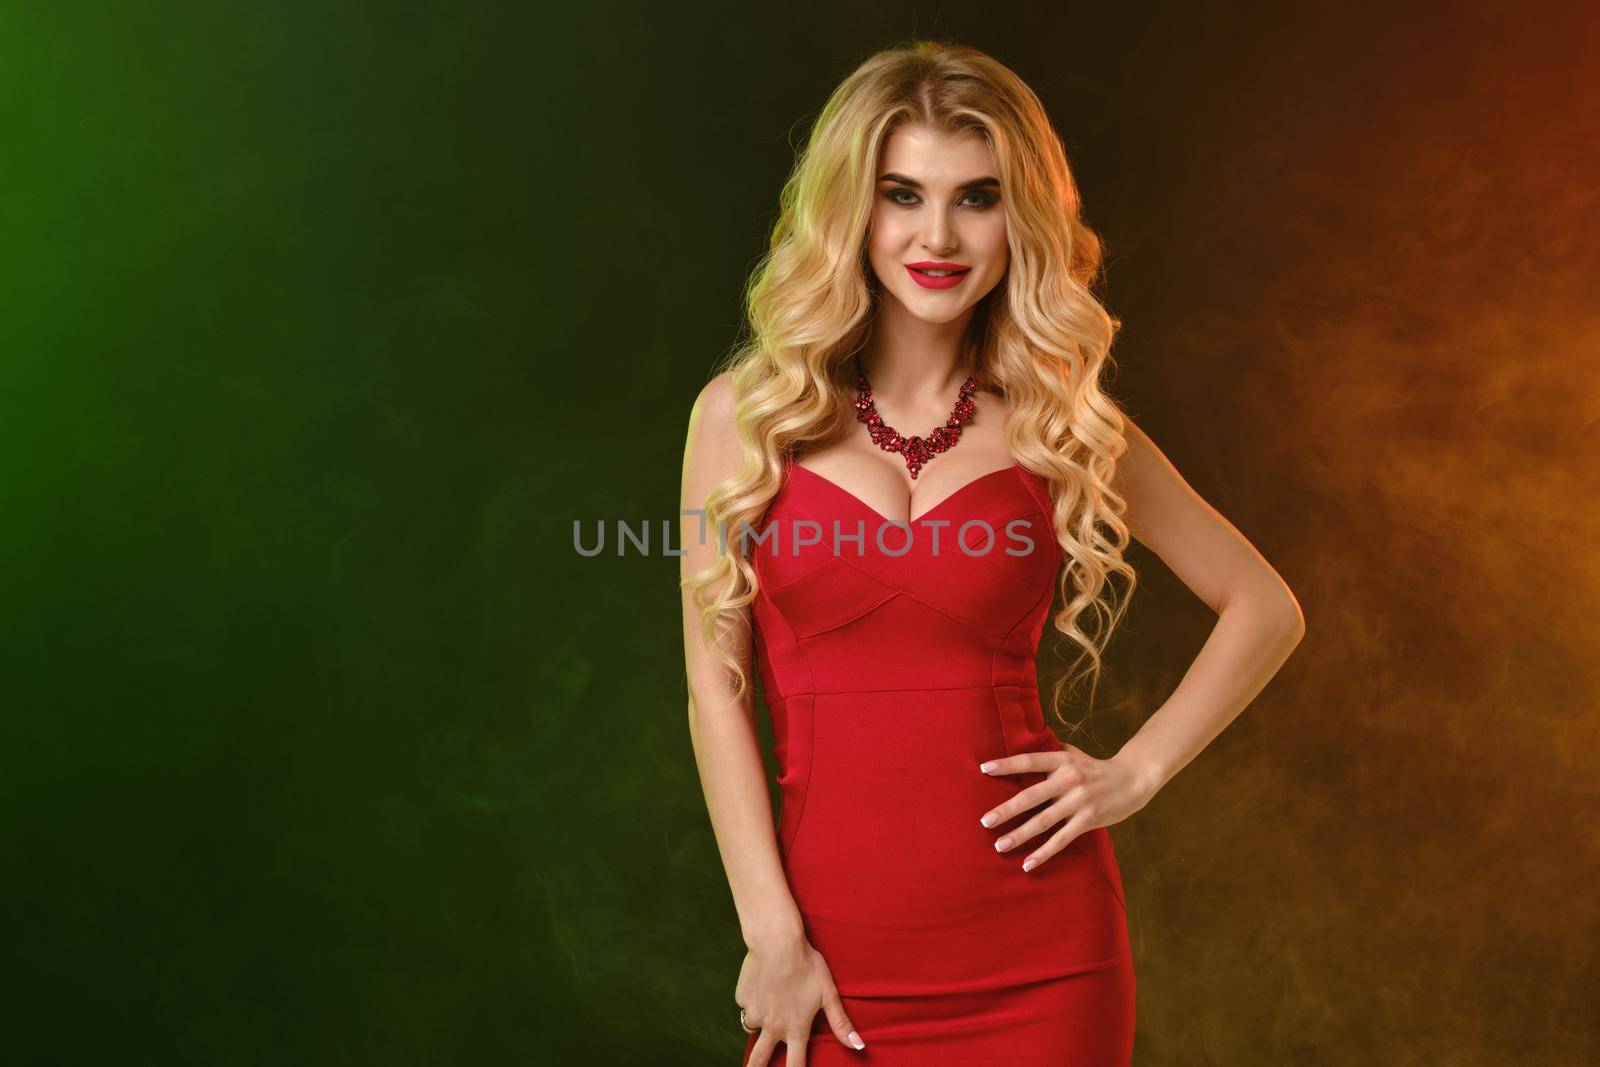 Curly blonde woman with bright make-up and alluring decollete, in red fitting dress and necklace. Smiling, hand on waist, posing on colorful smoky background. Fashion and beauty. Close up, copy space